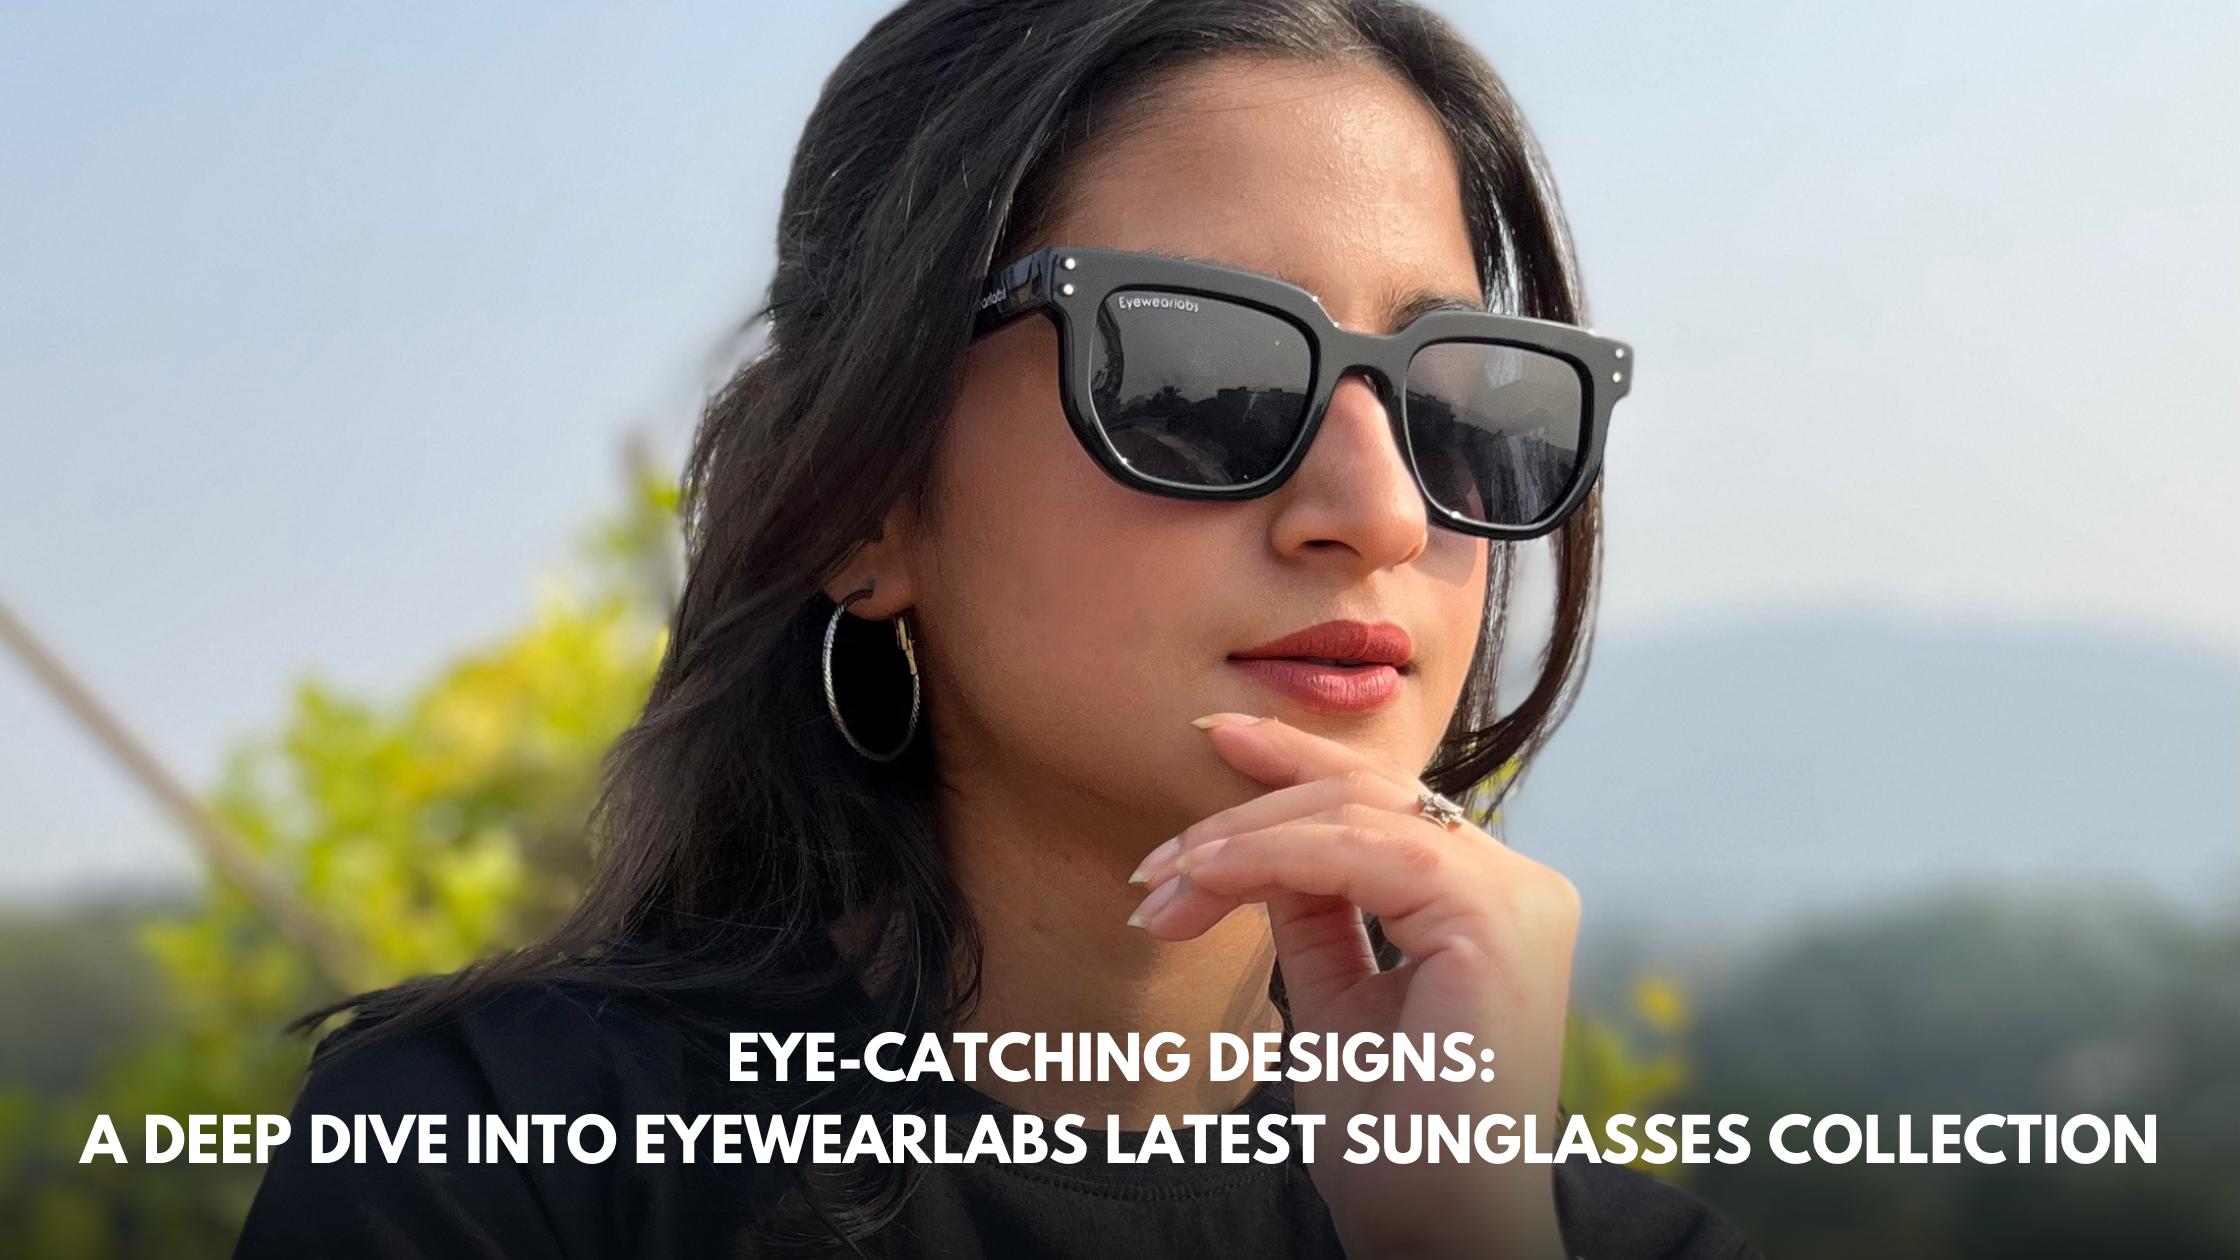 Eye-Catching Designs: A Deep Dive into Eyewearlabs Latest Sunglasses Collection